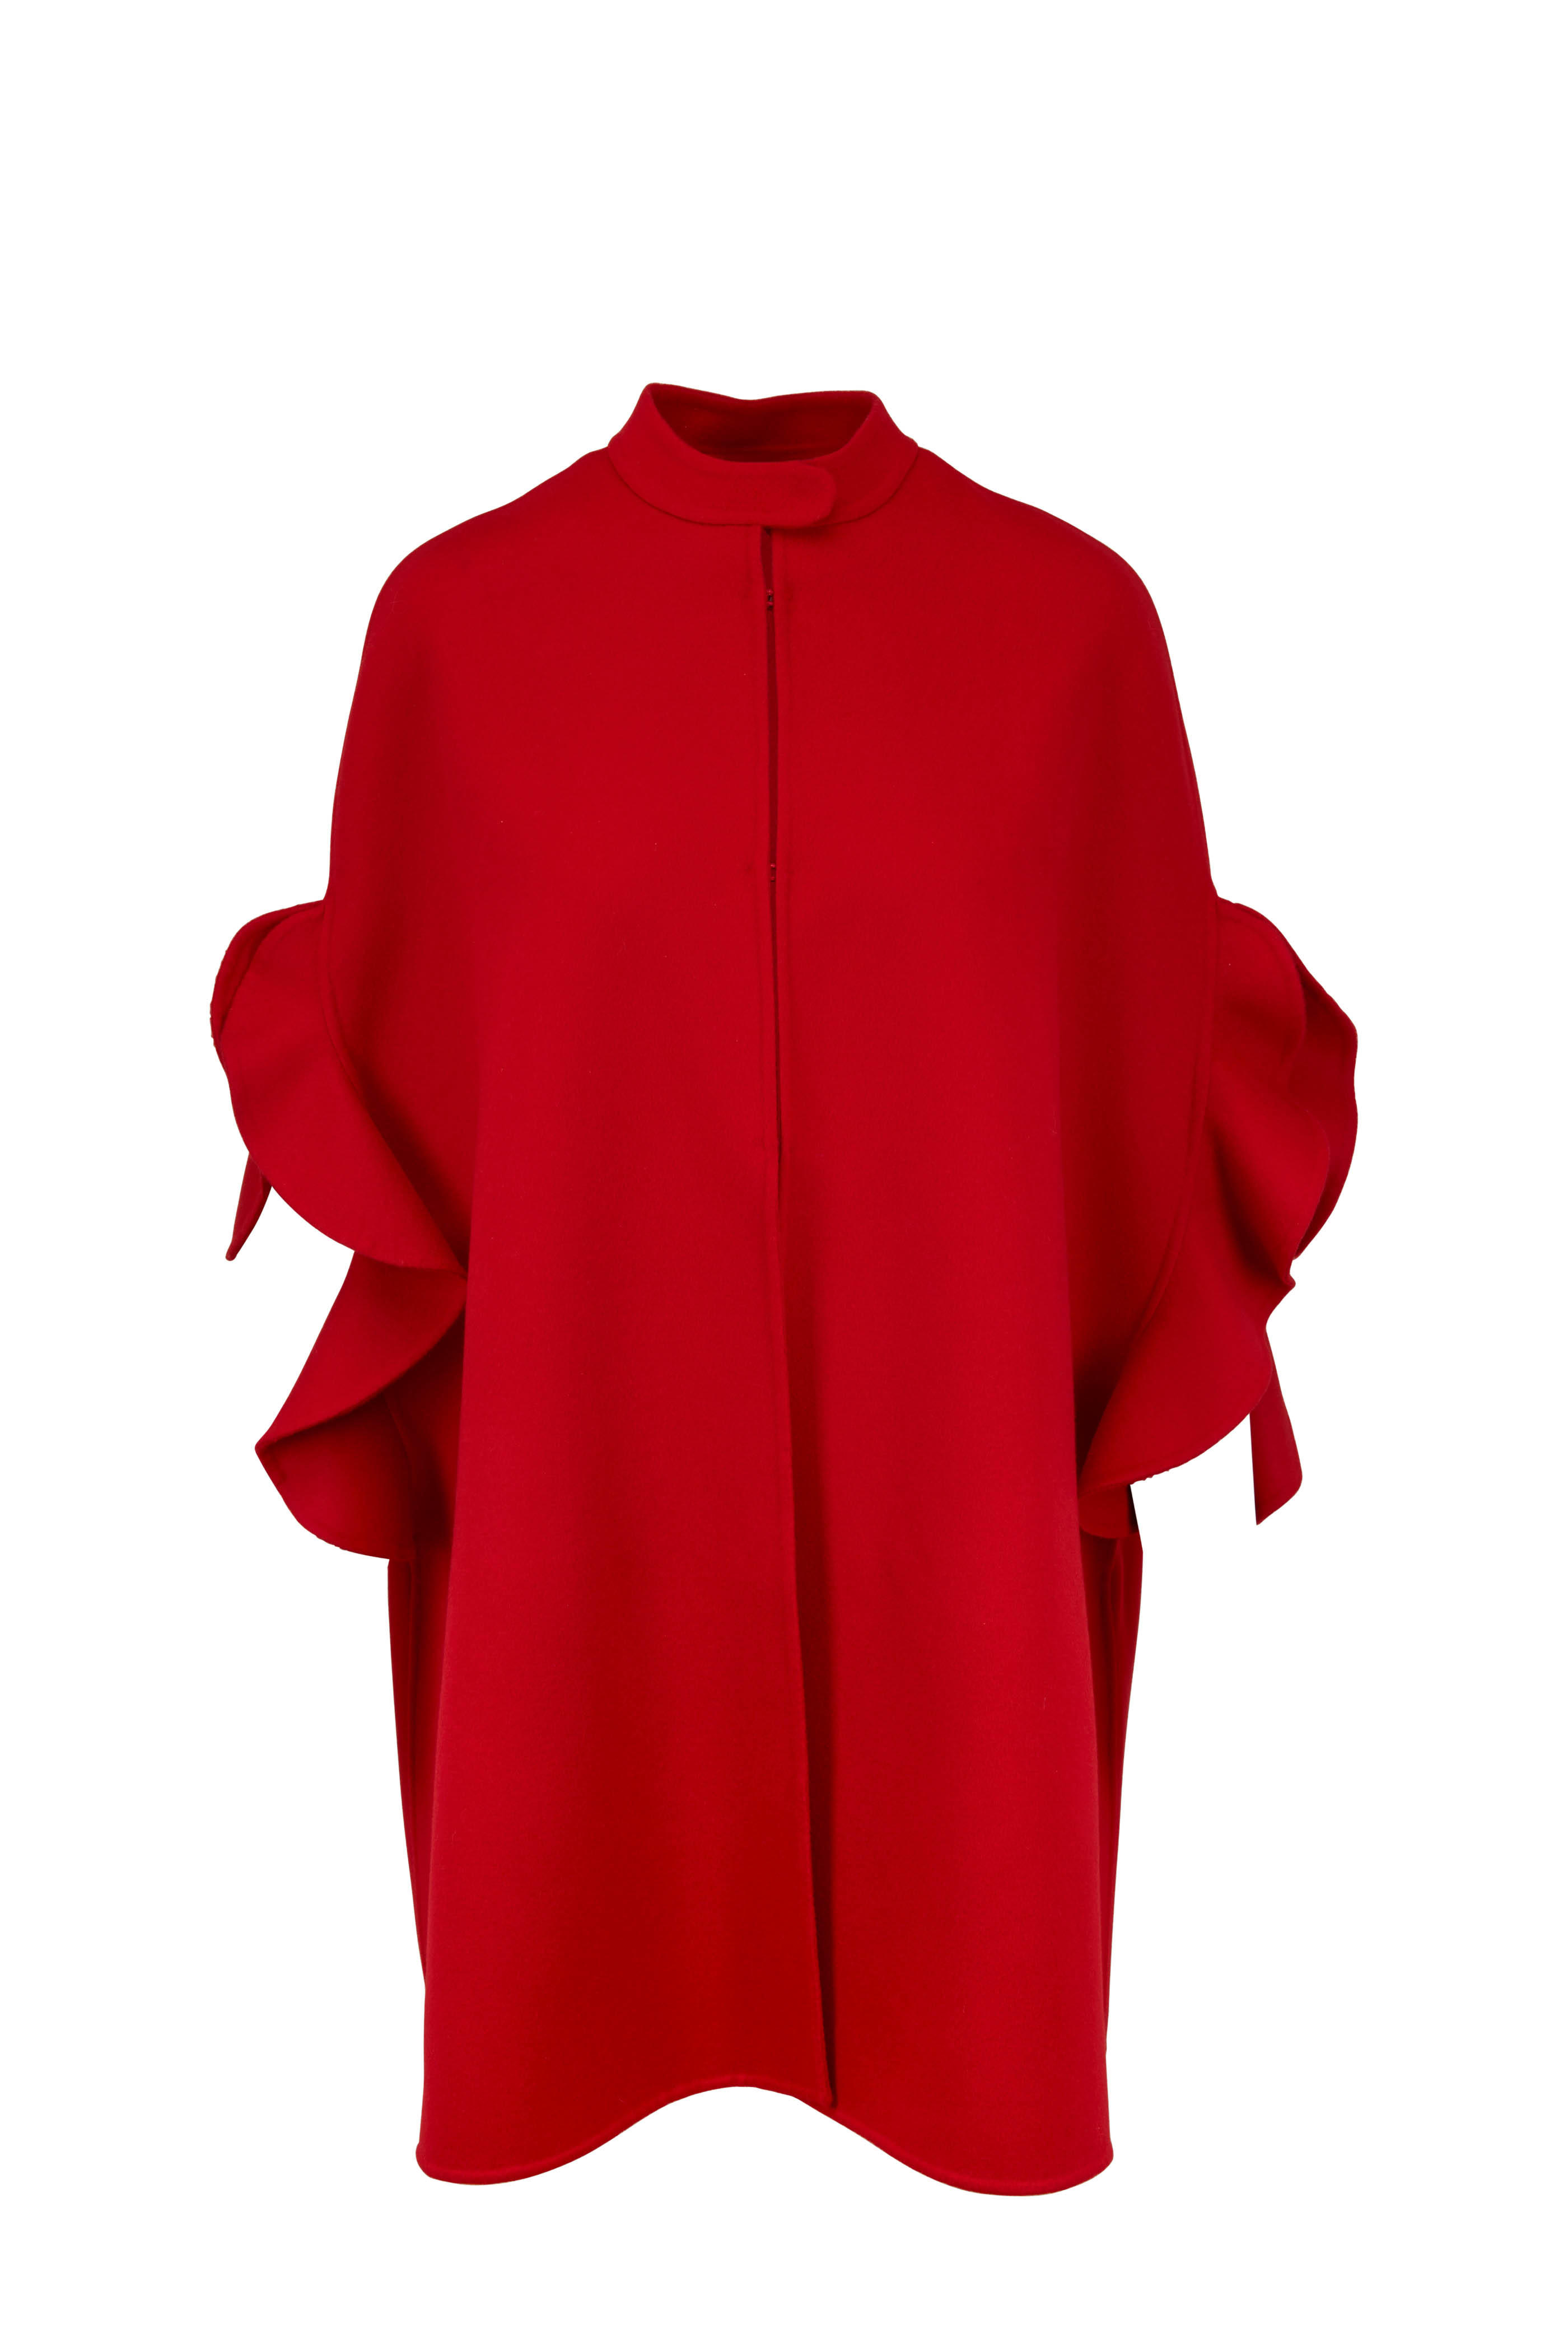 enkel reagere Theseus Valentino - Red Double-Faced Wool & Cashmere Cape | Mitchell Stores